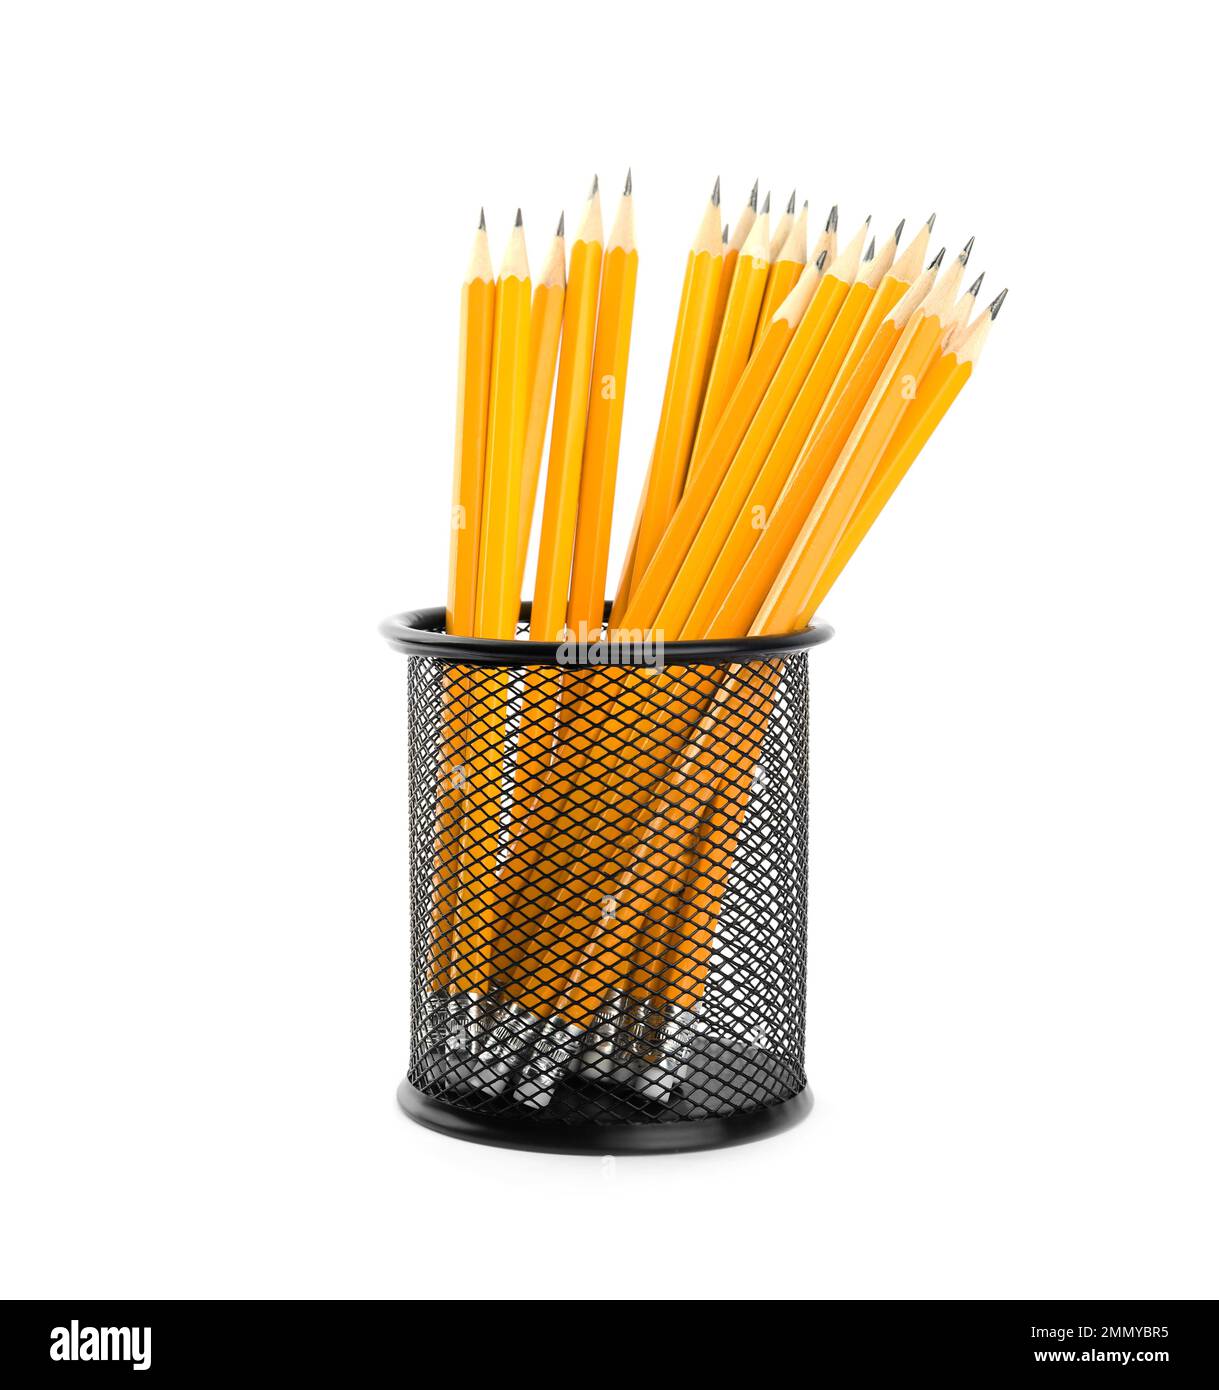 Many sharp pencils in holder isolated on white Stock Photo